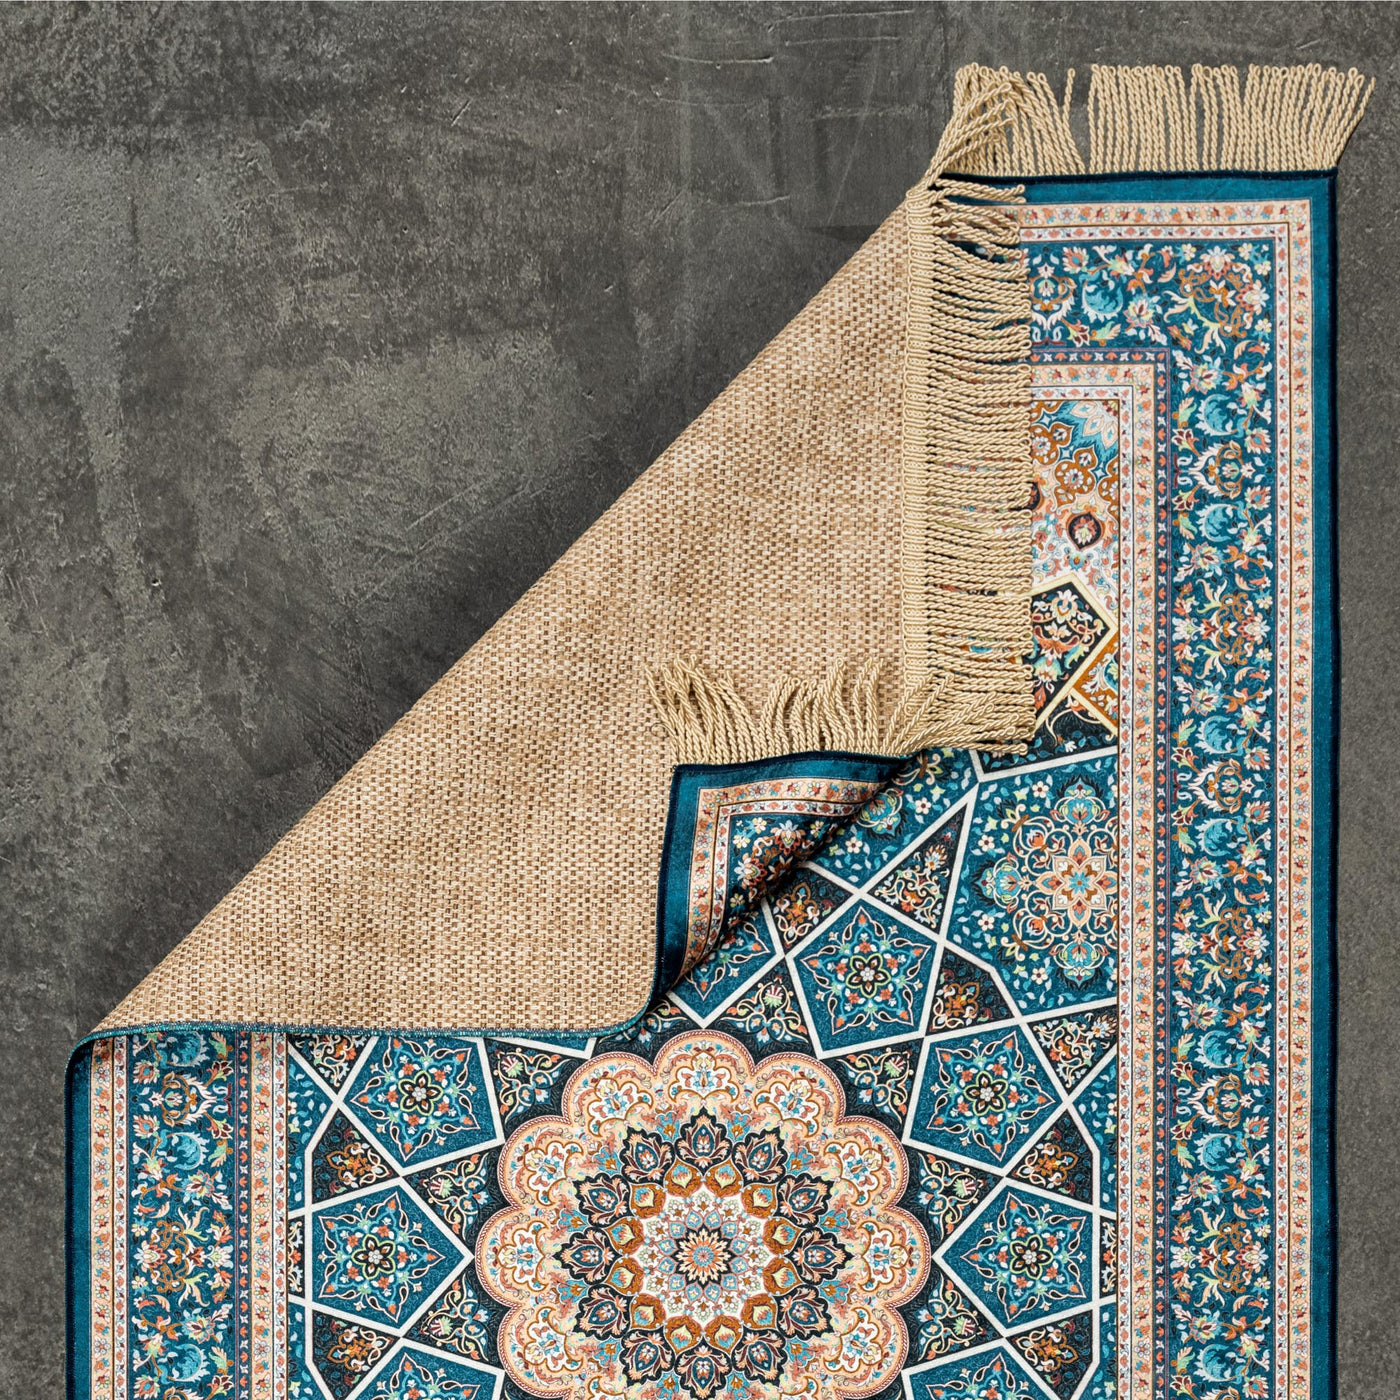 Premium Oriental Prayer Rug is a high-end quality Prayer Rug from Seven Sajada. The Premium Oriental Prayer Rug has a very beautiful detailed pattern.